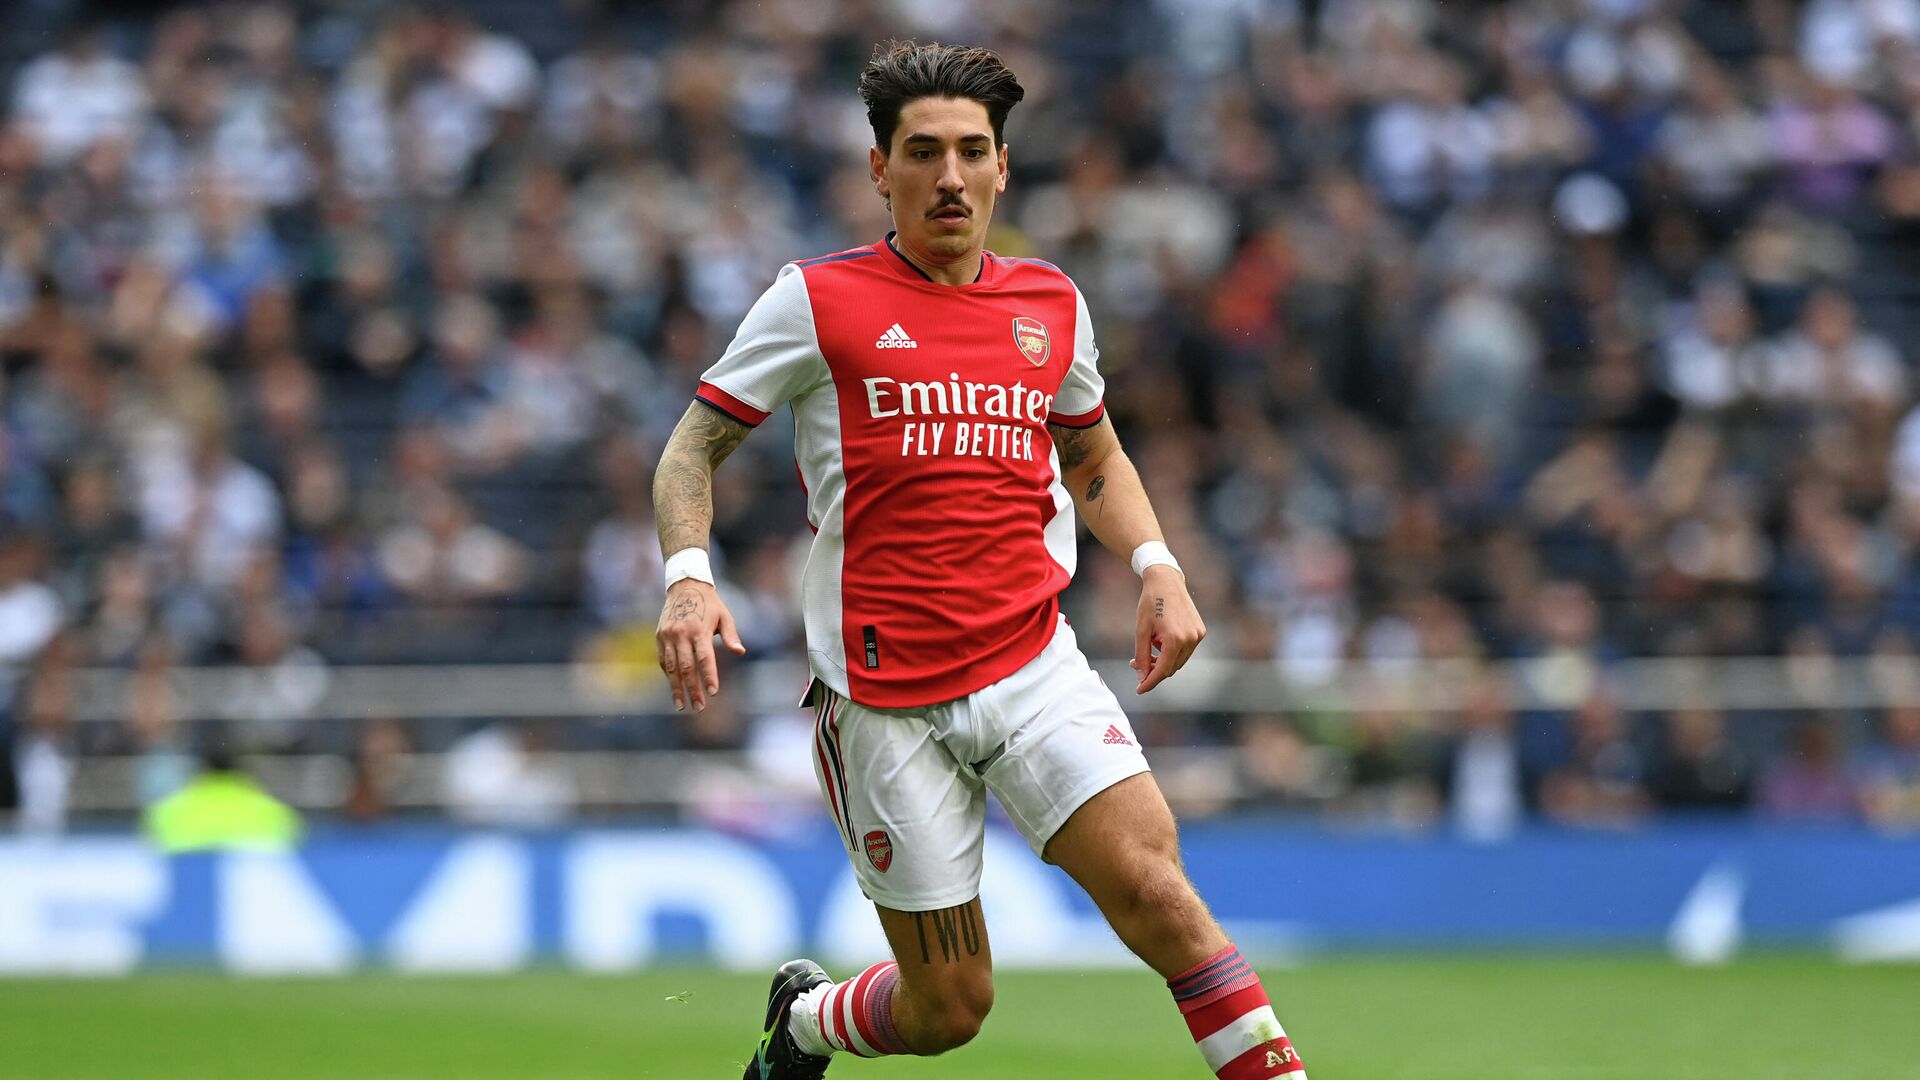 Arsenal's Spanish defender Hector Bellerin runs with the ball during the pre-season friendly football match between Tottenham Hotspur and Arsenal at Tottenham Hotspur Stadium in London on August 8, 2021. (Photo by Glyn KIRK / AFP) / RESTRICTED TO EDITORIAL USE. No use with unauthorized audio, video, data, fixture lists, club/league logos or 'live' services. Online in-match use limited to 75 images, no video emulation. No use in betting, games or single club/league/player publications. /  - РИА Новости, 1920, 01.09.2021